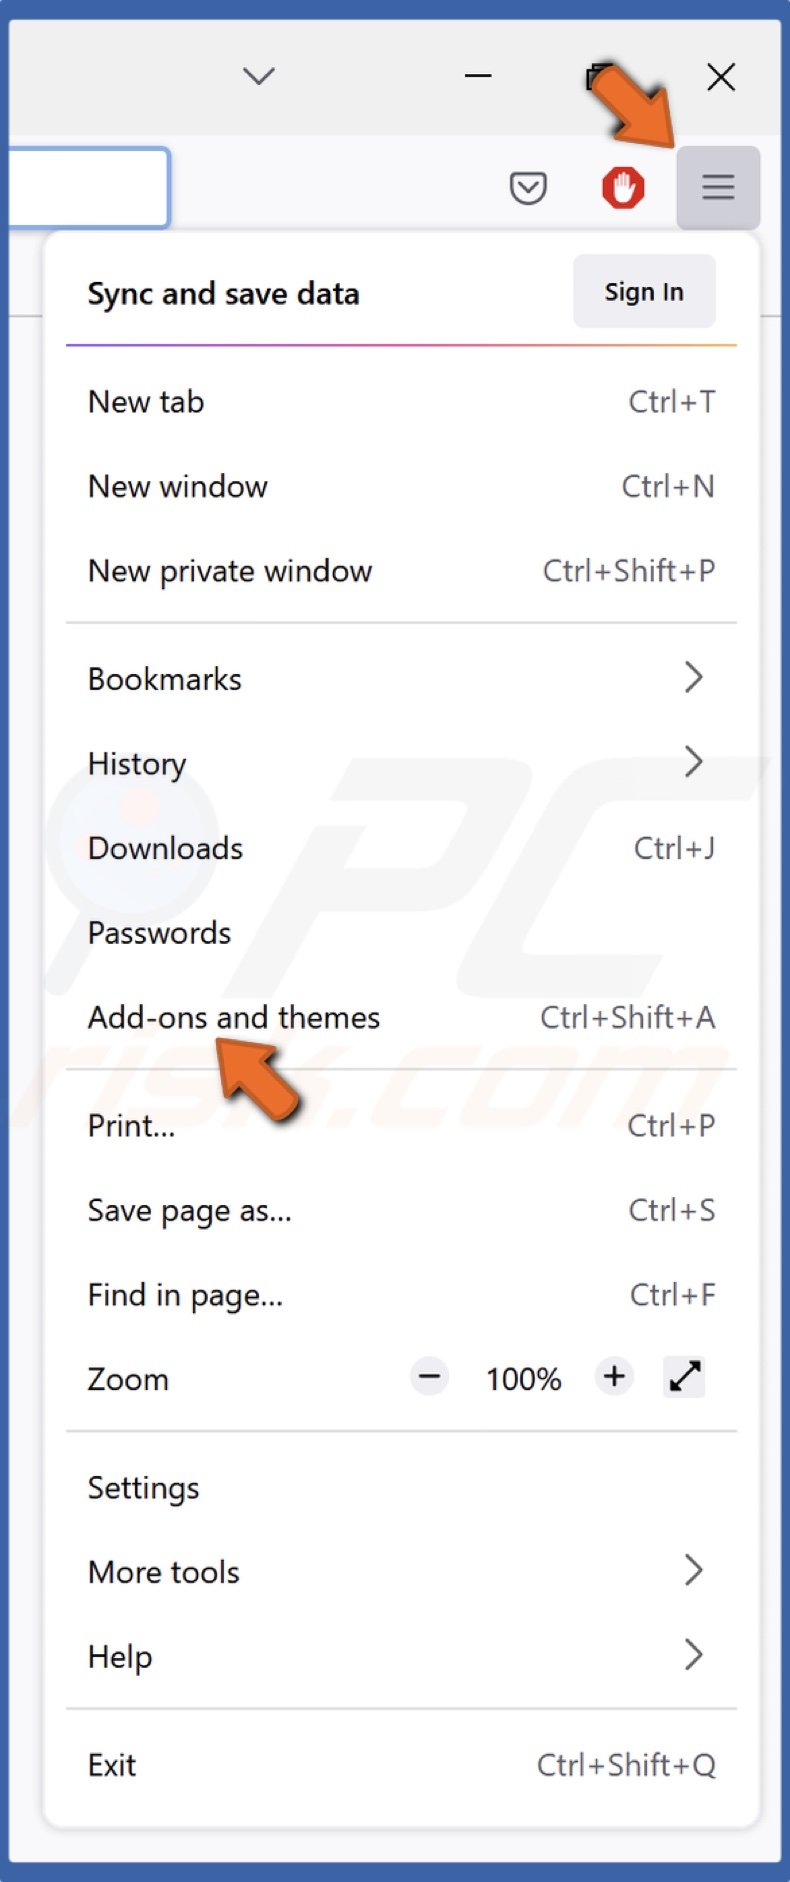 Open the application menu and click Add-ons and themes